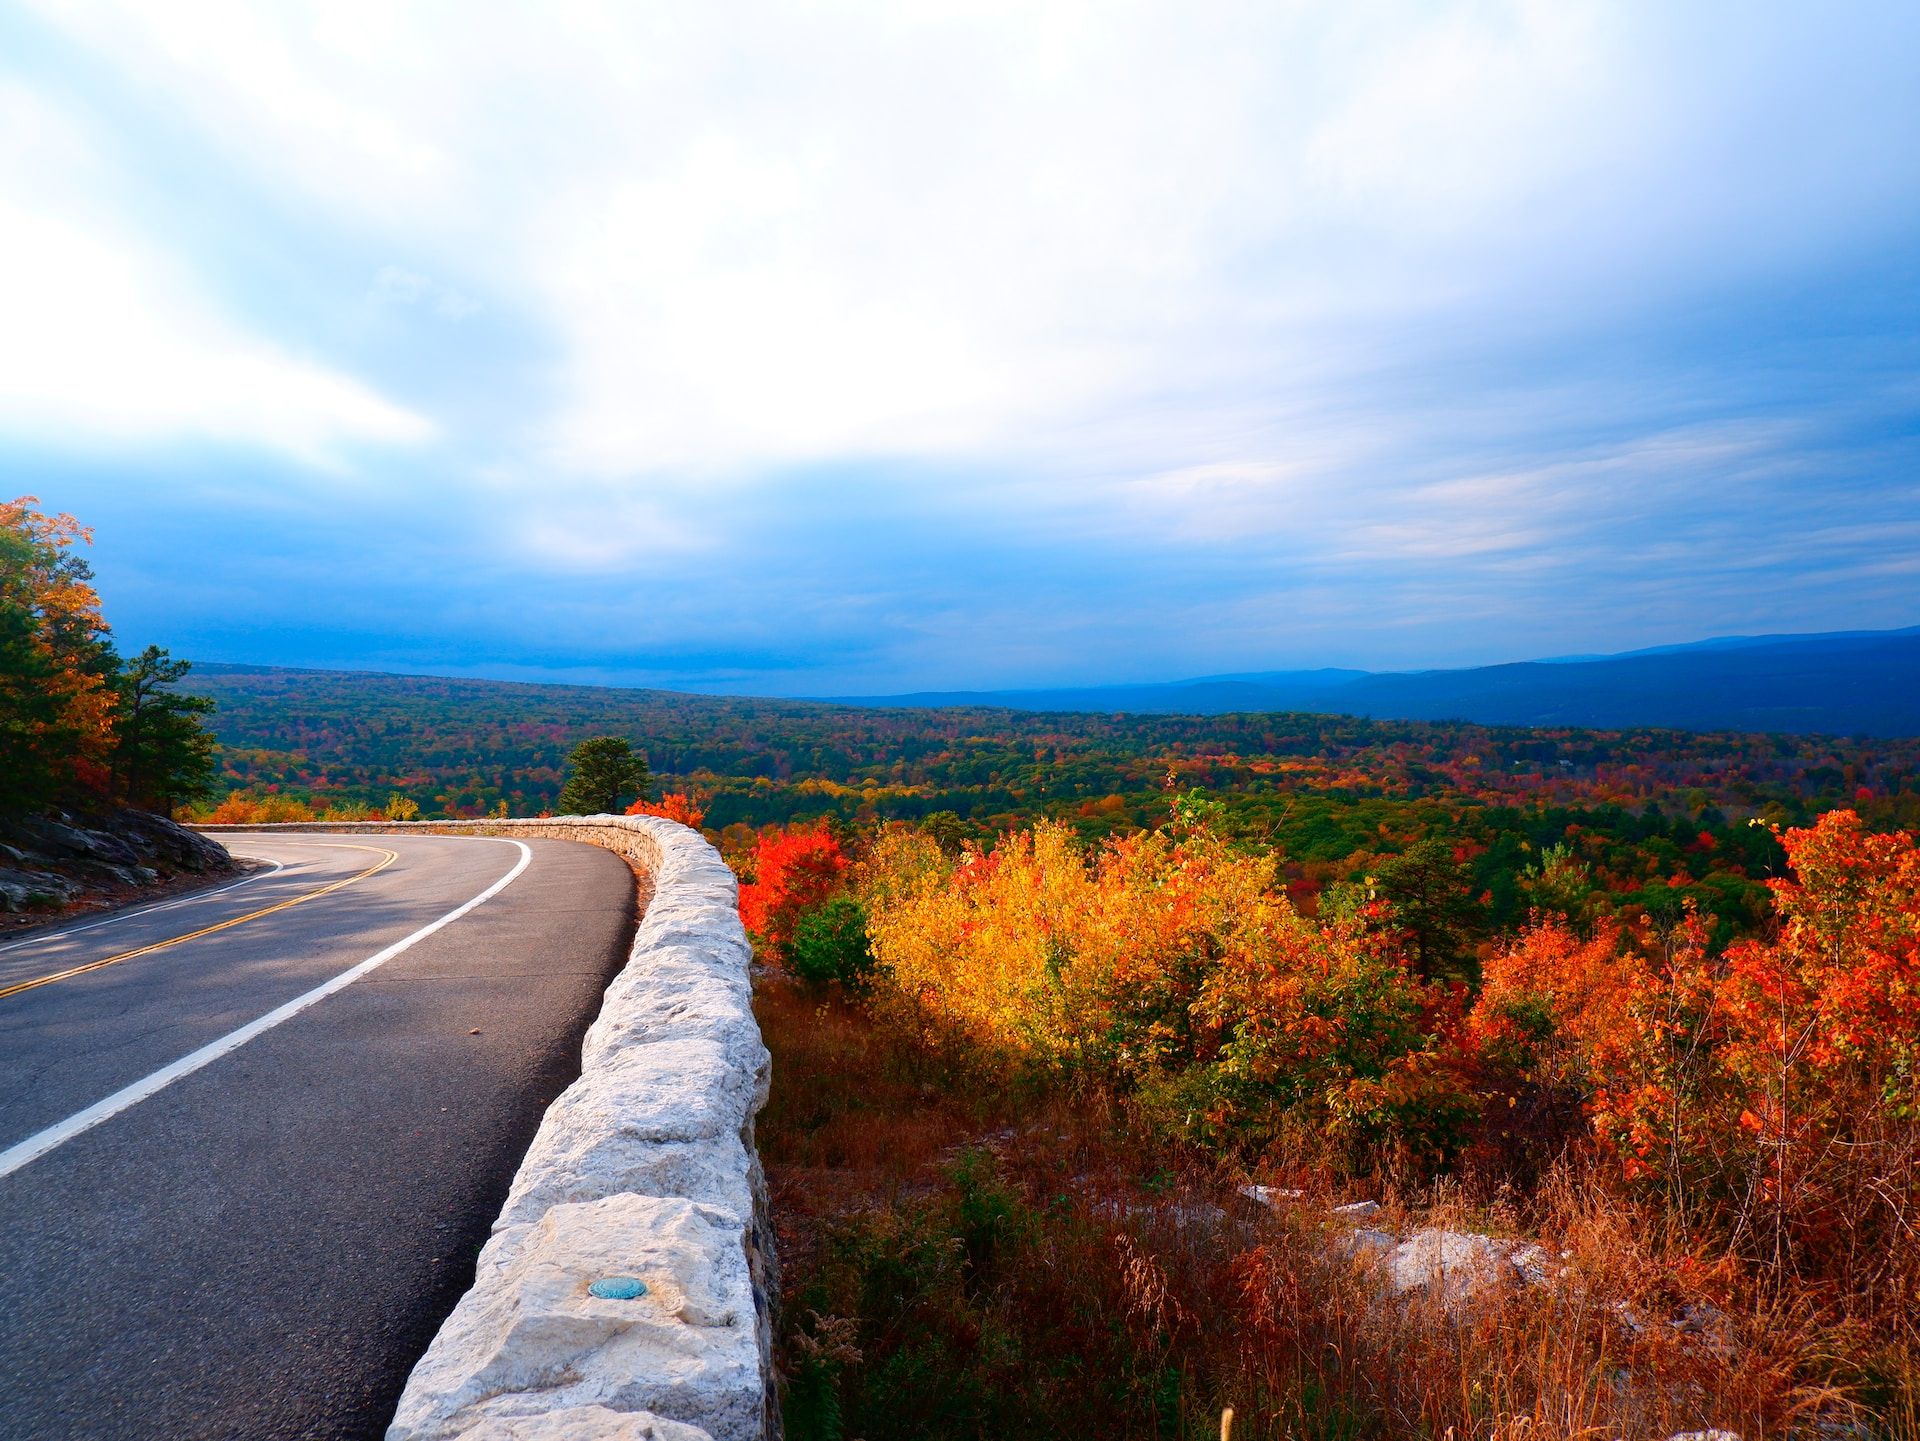 Highway winding through colorful autumn foliage in Catskill, New York